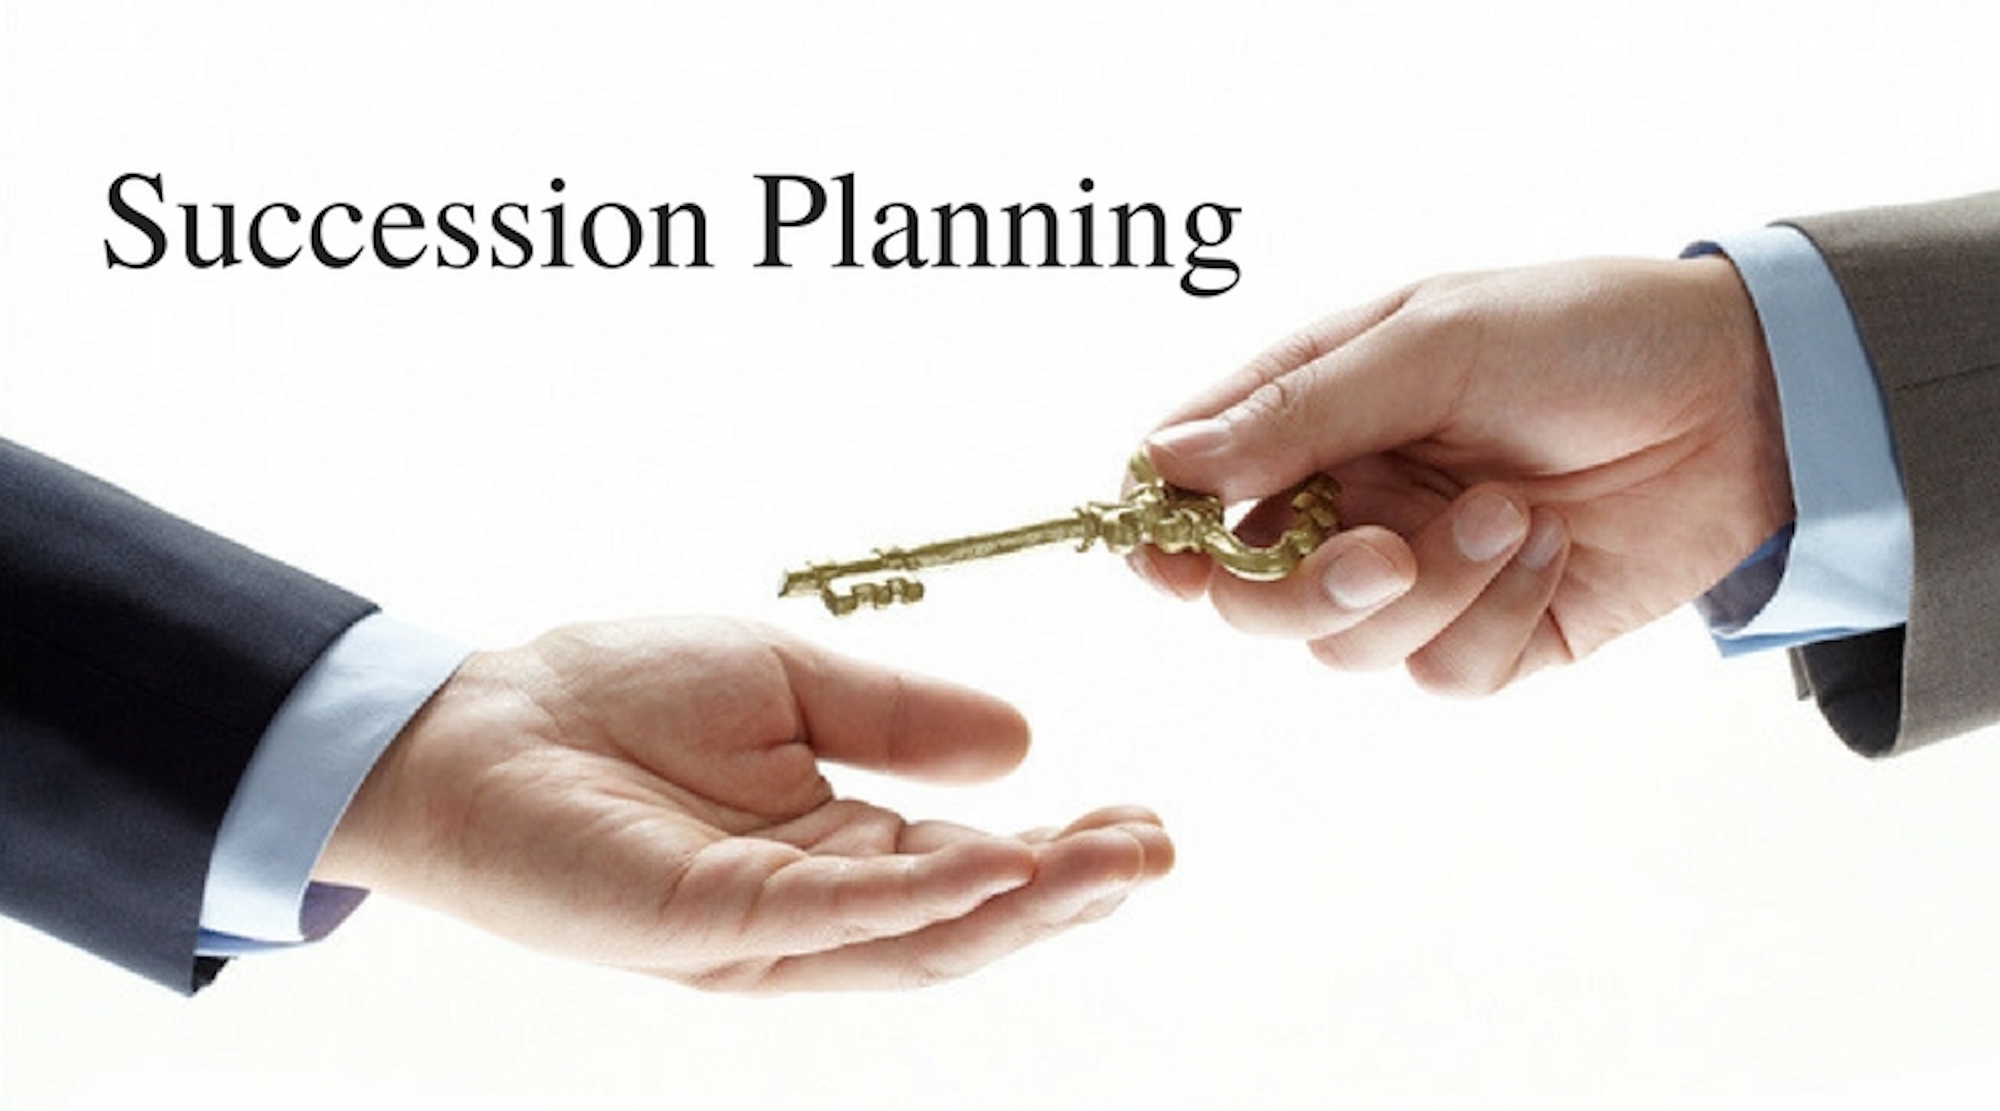 How to Succeed at Succession Planning – Part 2